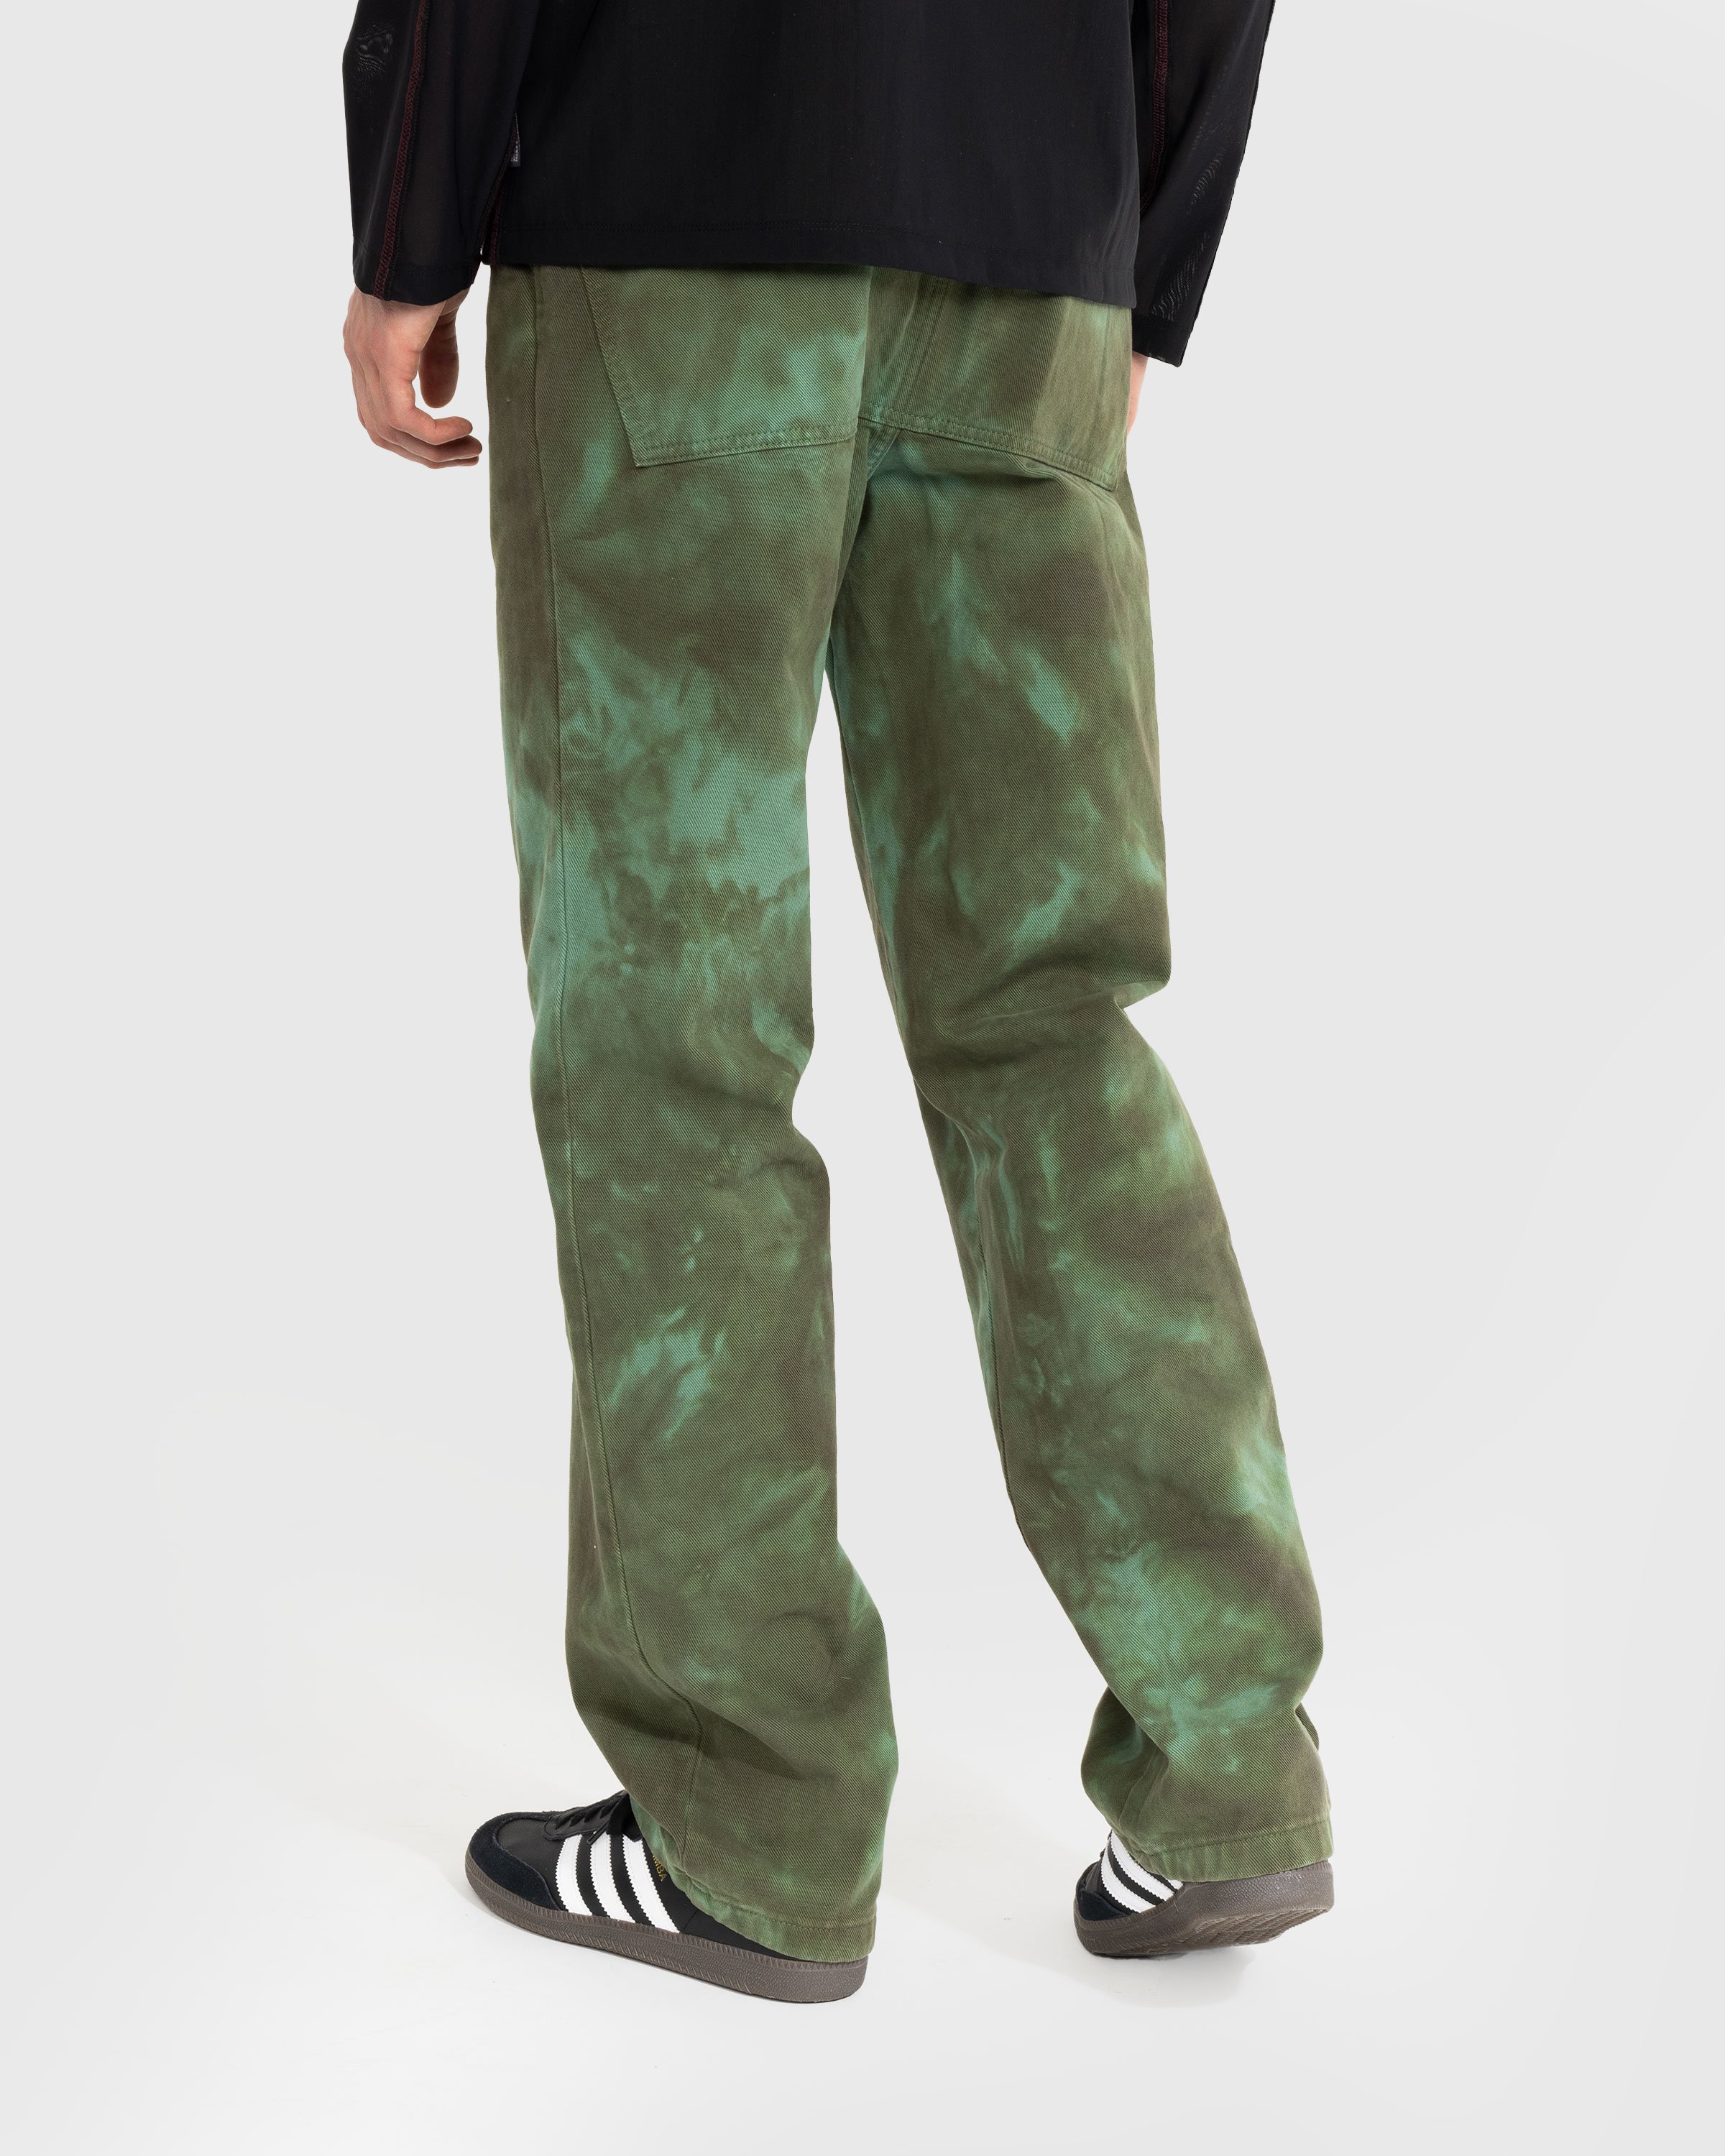 AFFXWRKS - Crease-Dye Duty Pant Green - Clothing - Green - Image 3